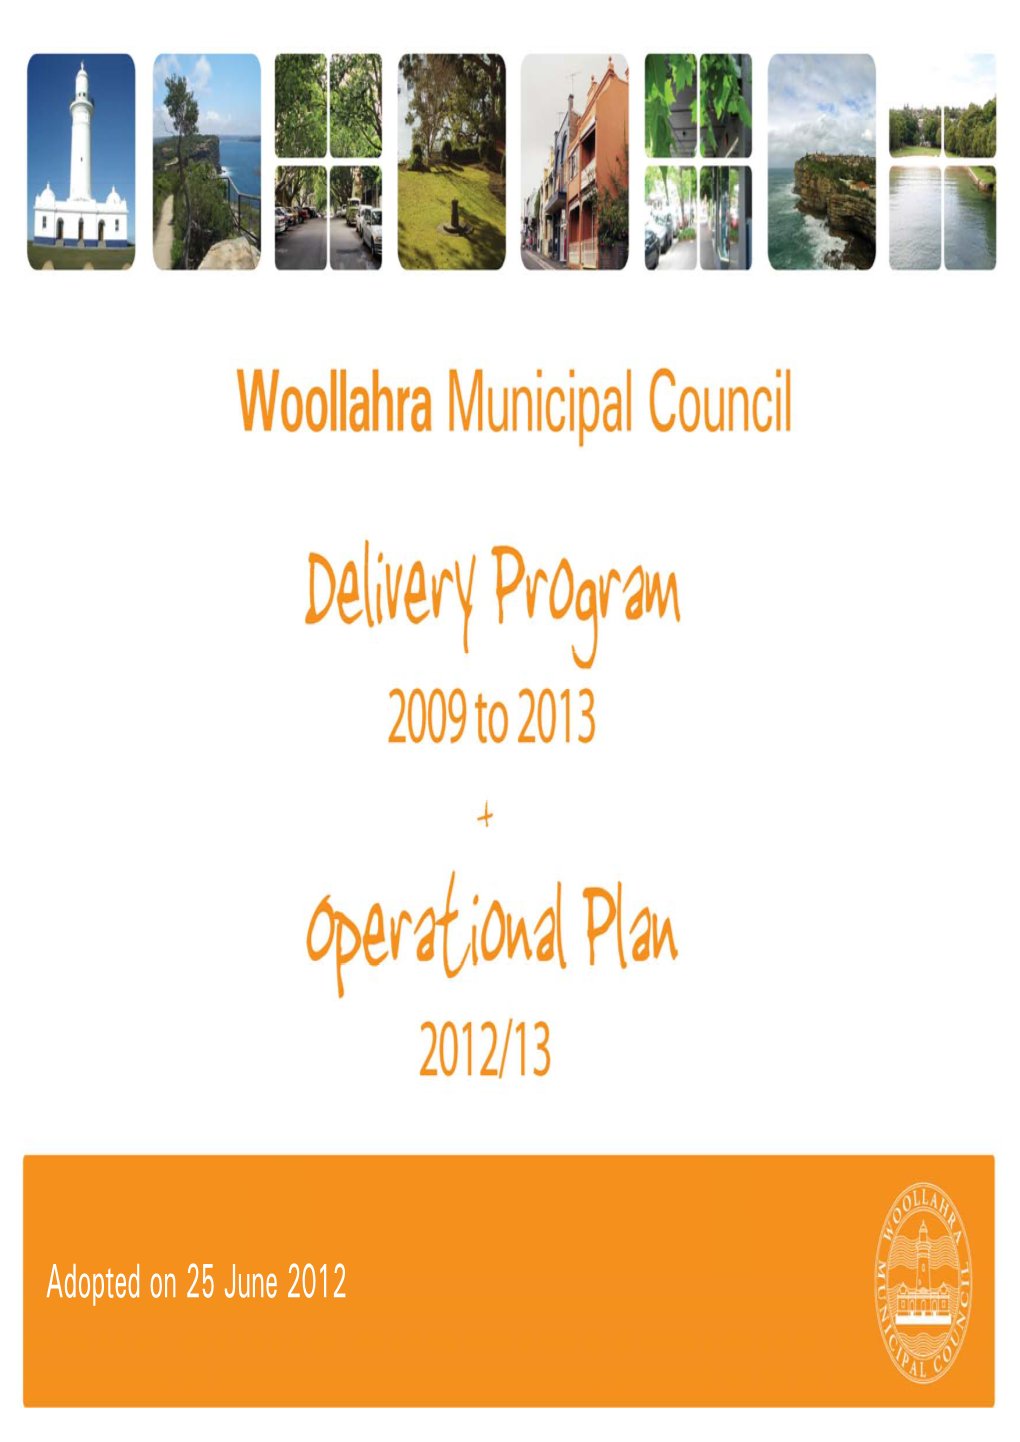 Delivery Program 2009-2013 and Operational Plan 2012/13 (DPOP)